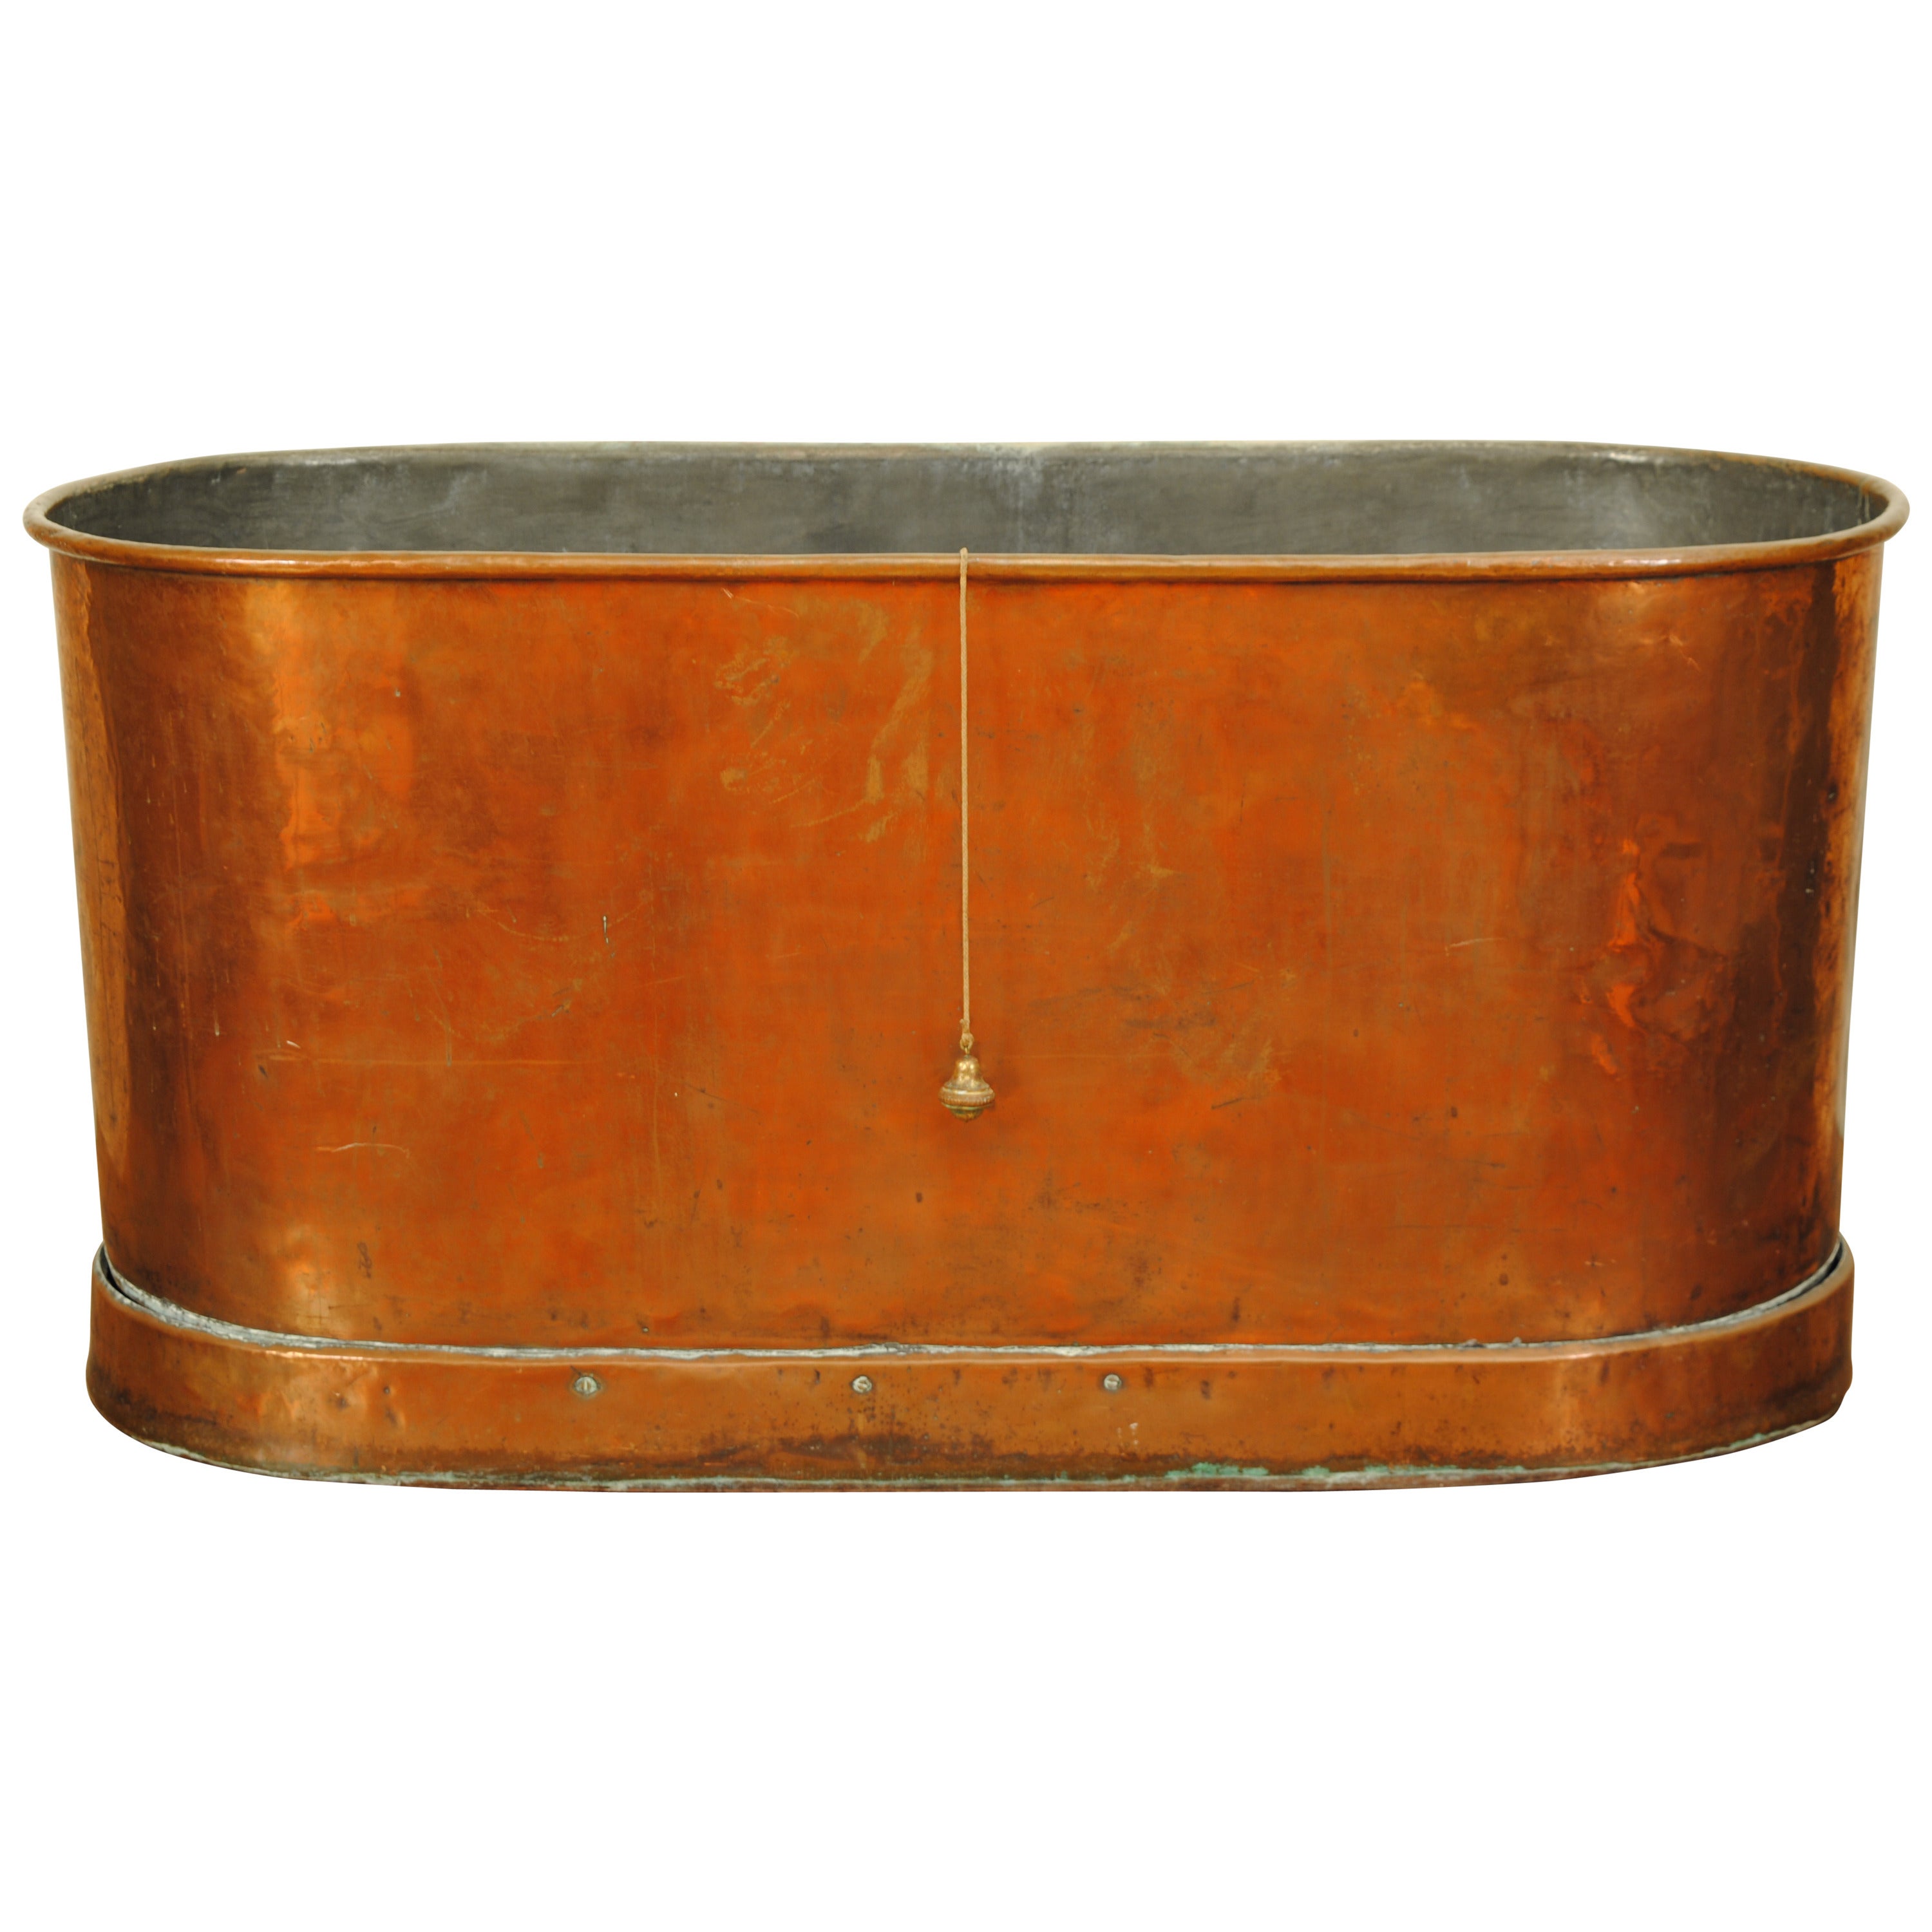 German Neoclassical Copper and Zinc Lined Bathtub